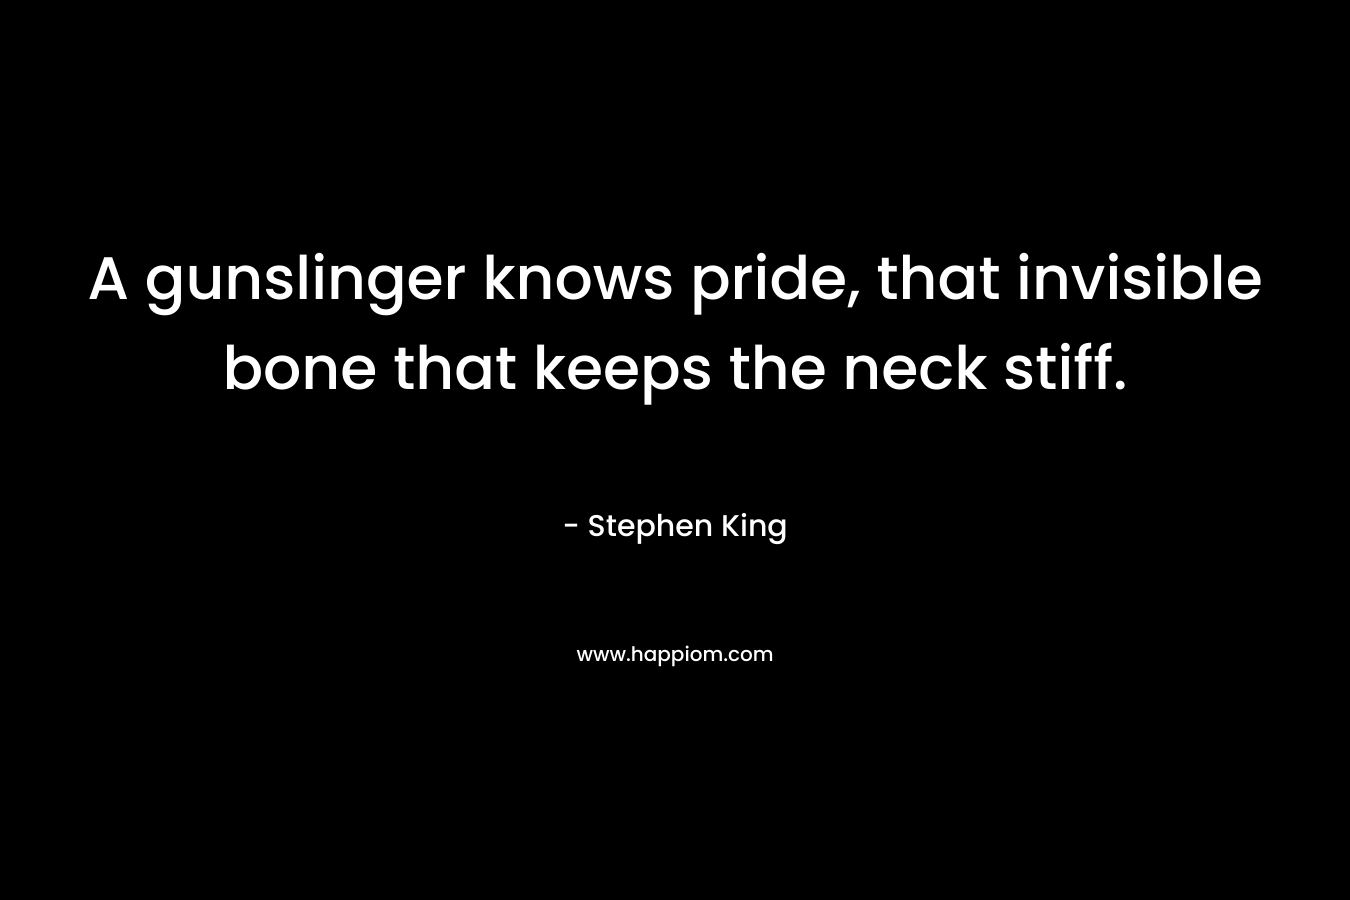 A gunslinger knows pride, that invisible bone that keeps the neck stiff.